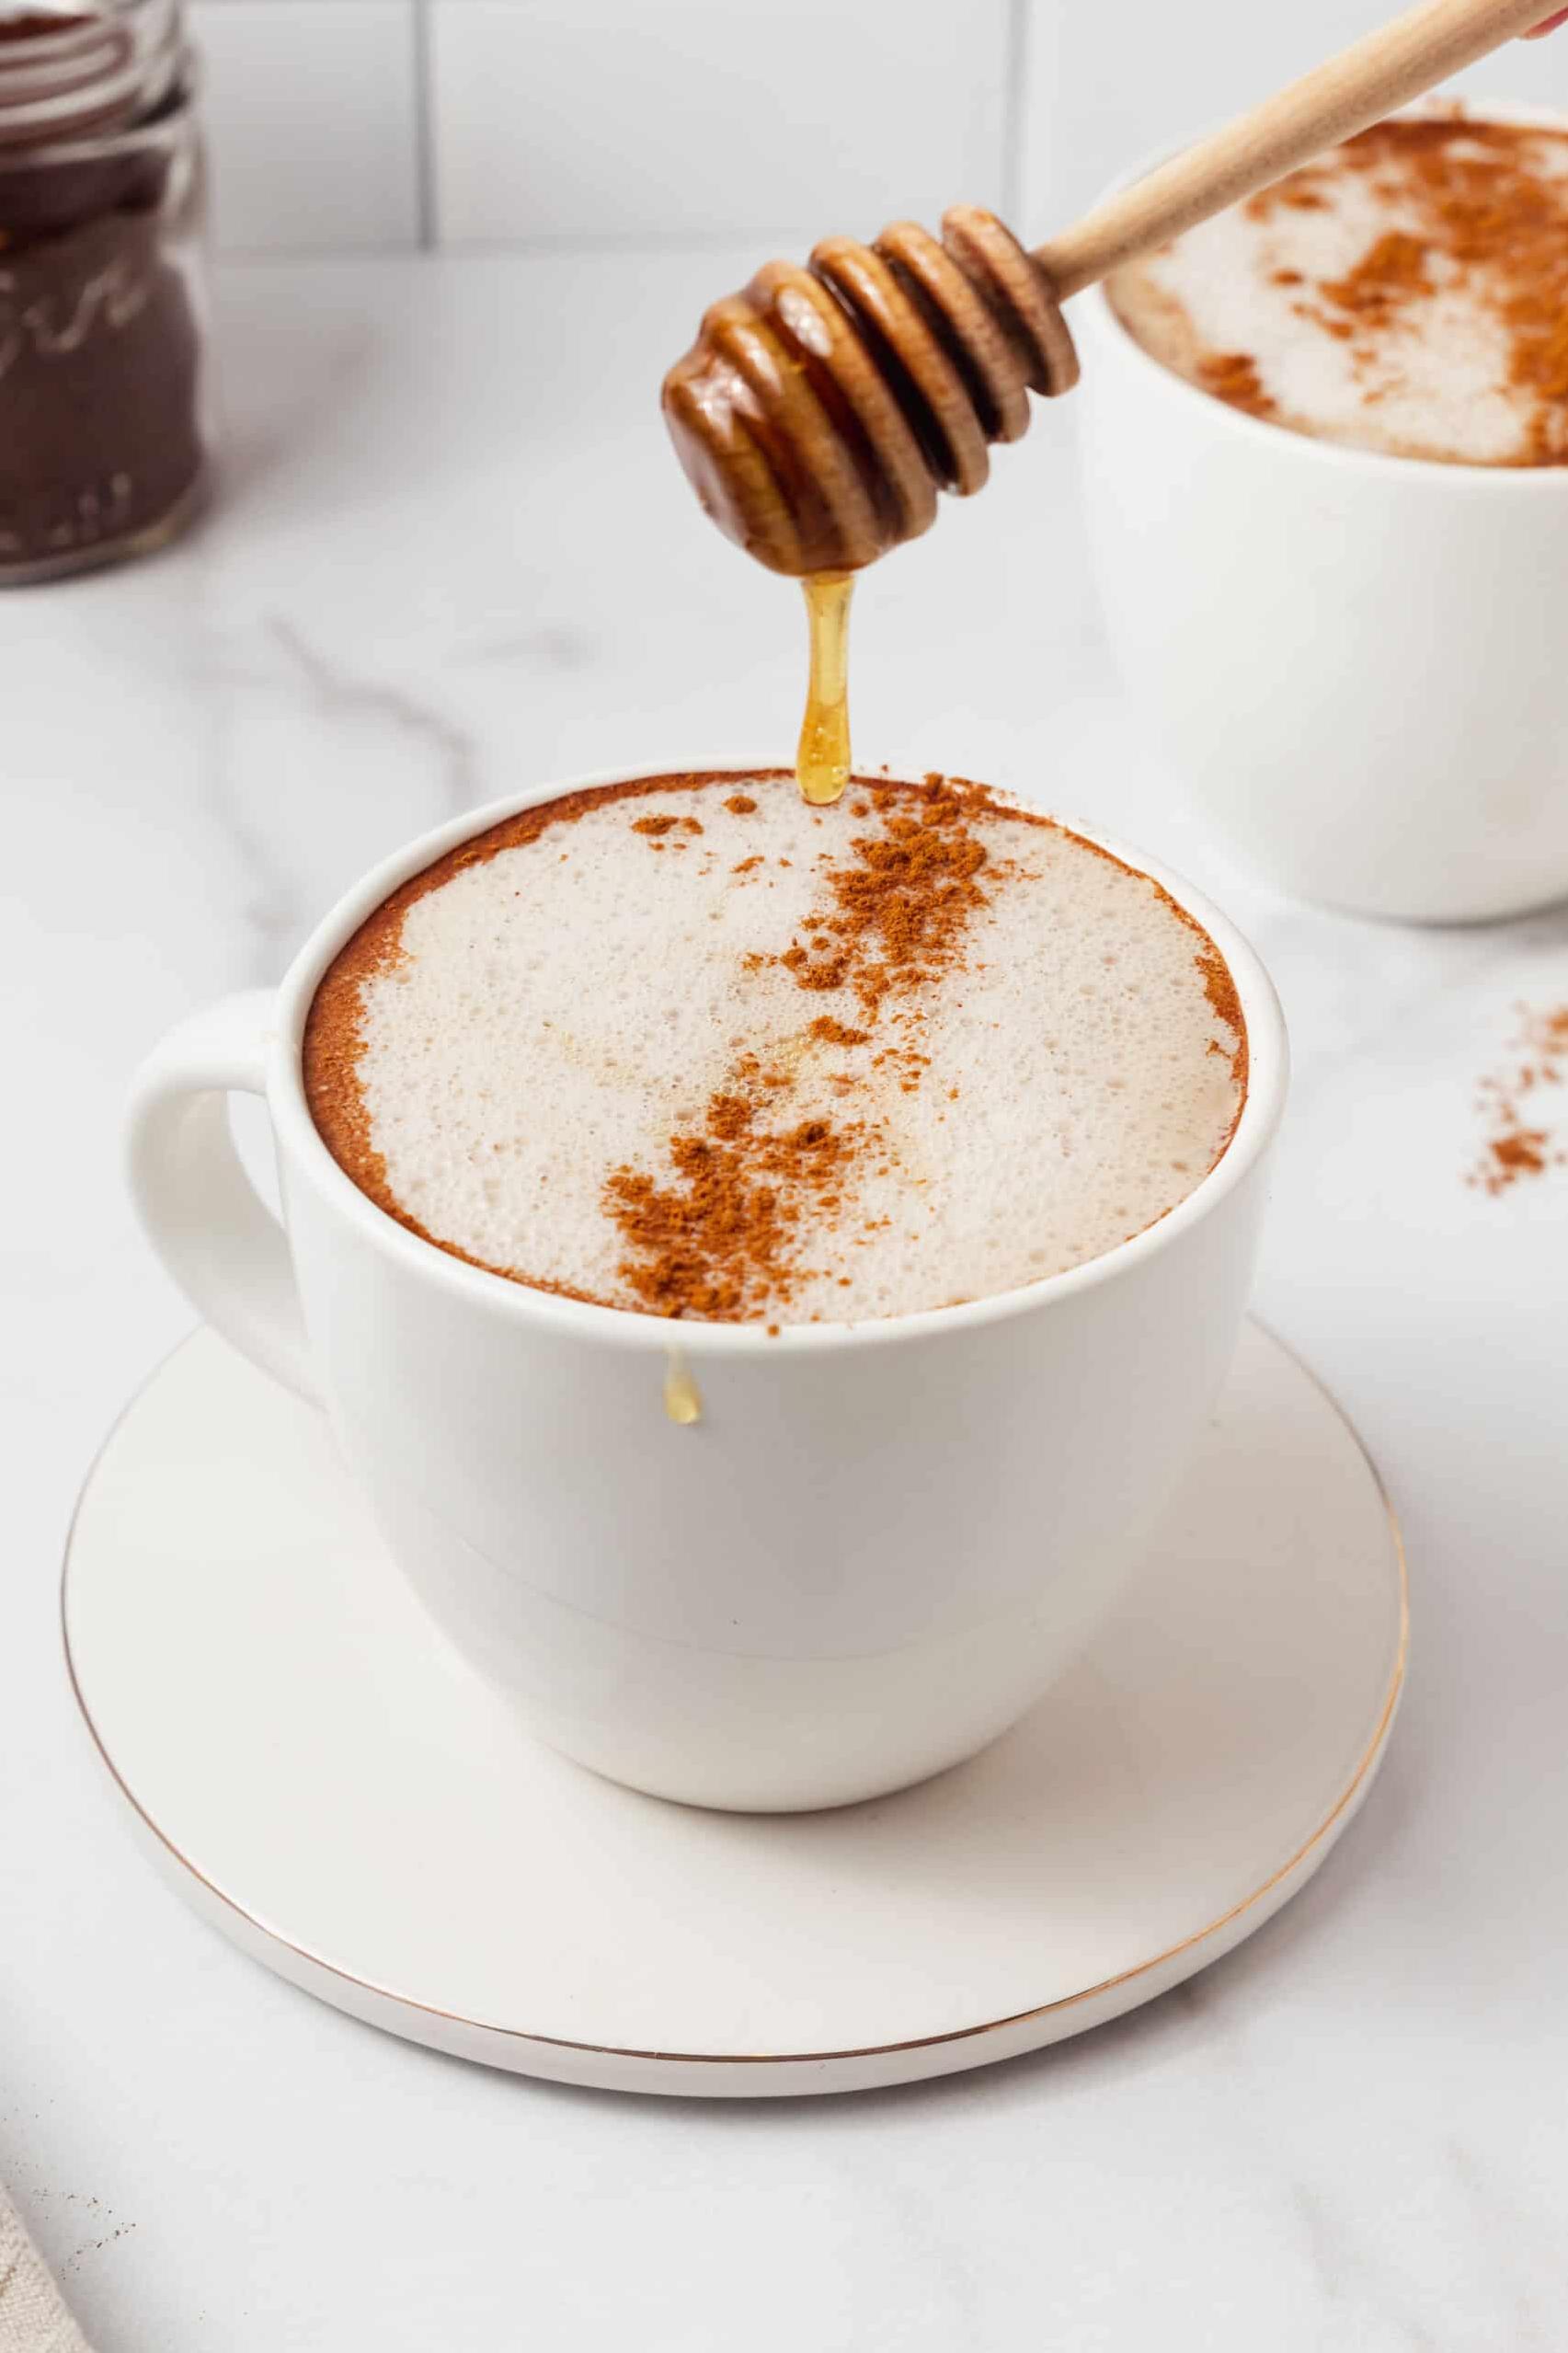  Kickstart your morning with the warmth and comfort of a cinnamon latte.